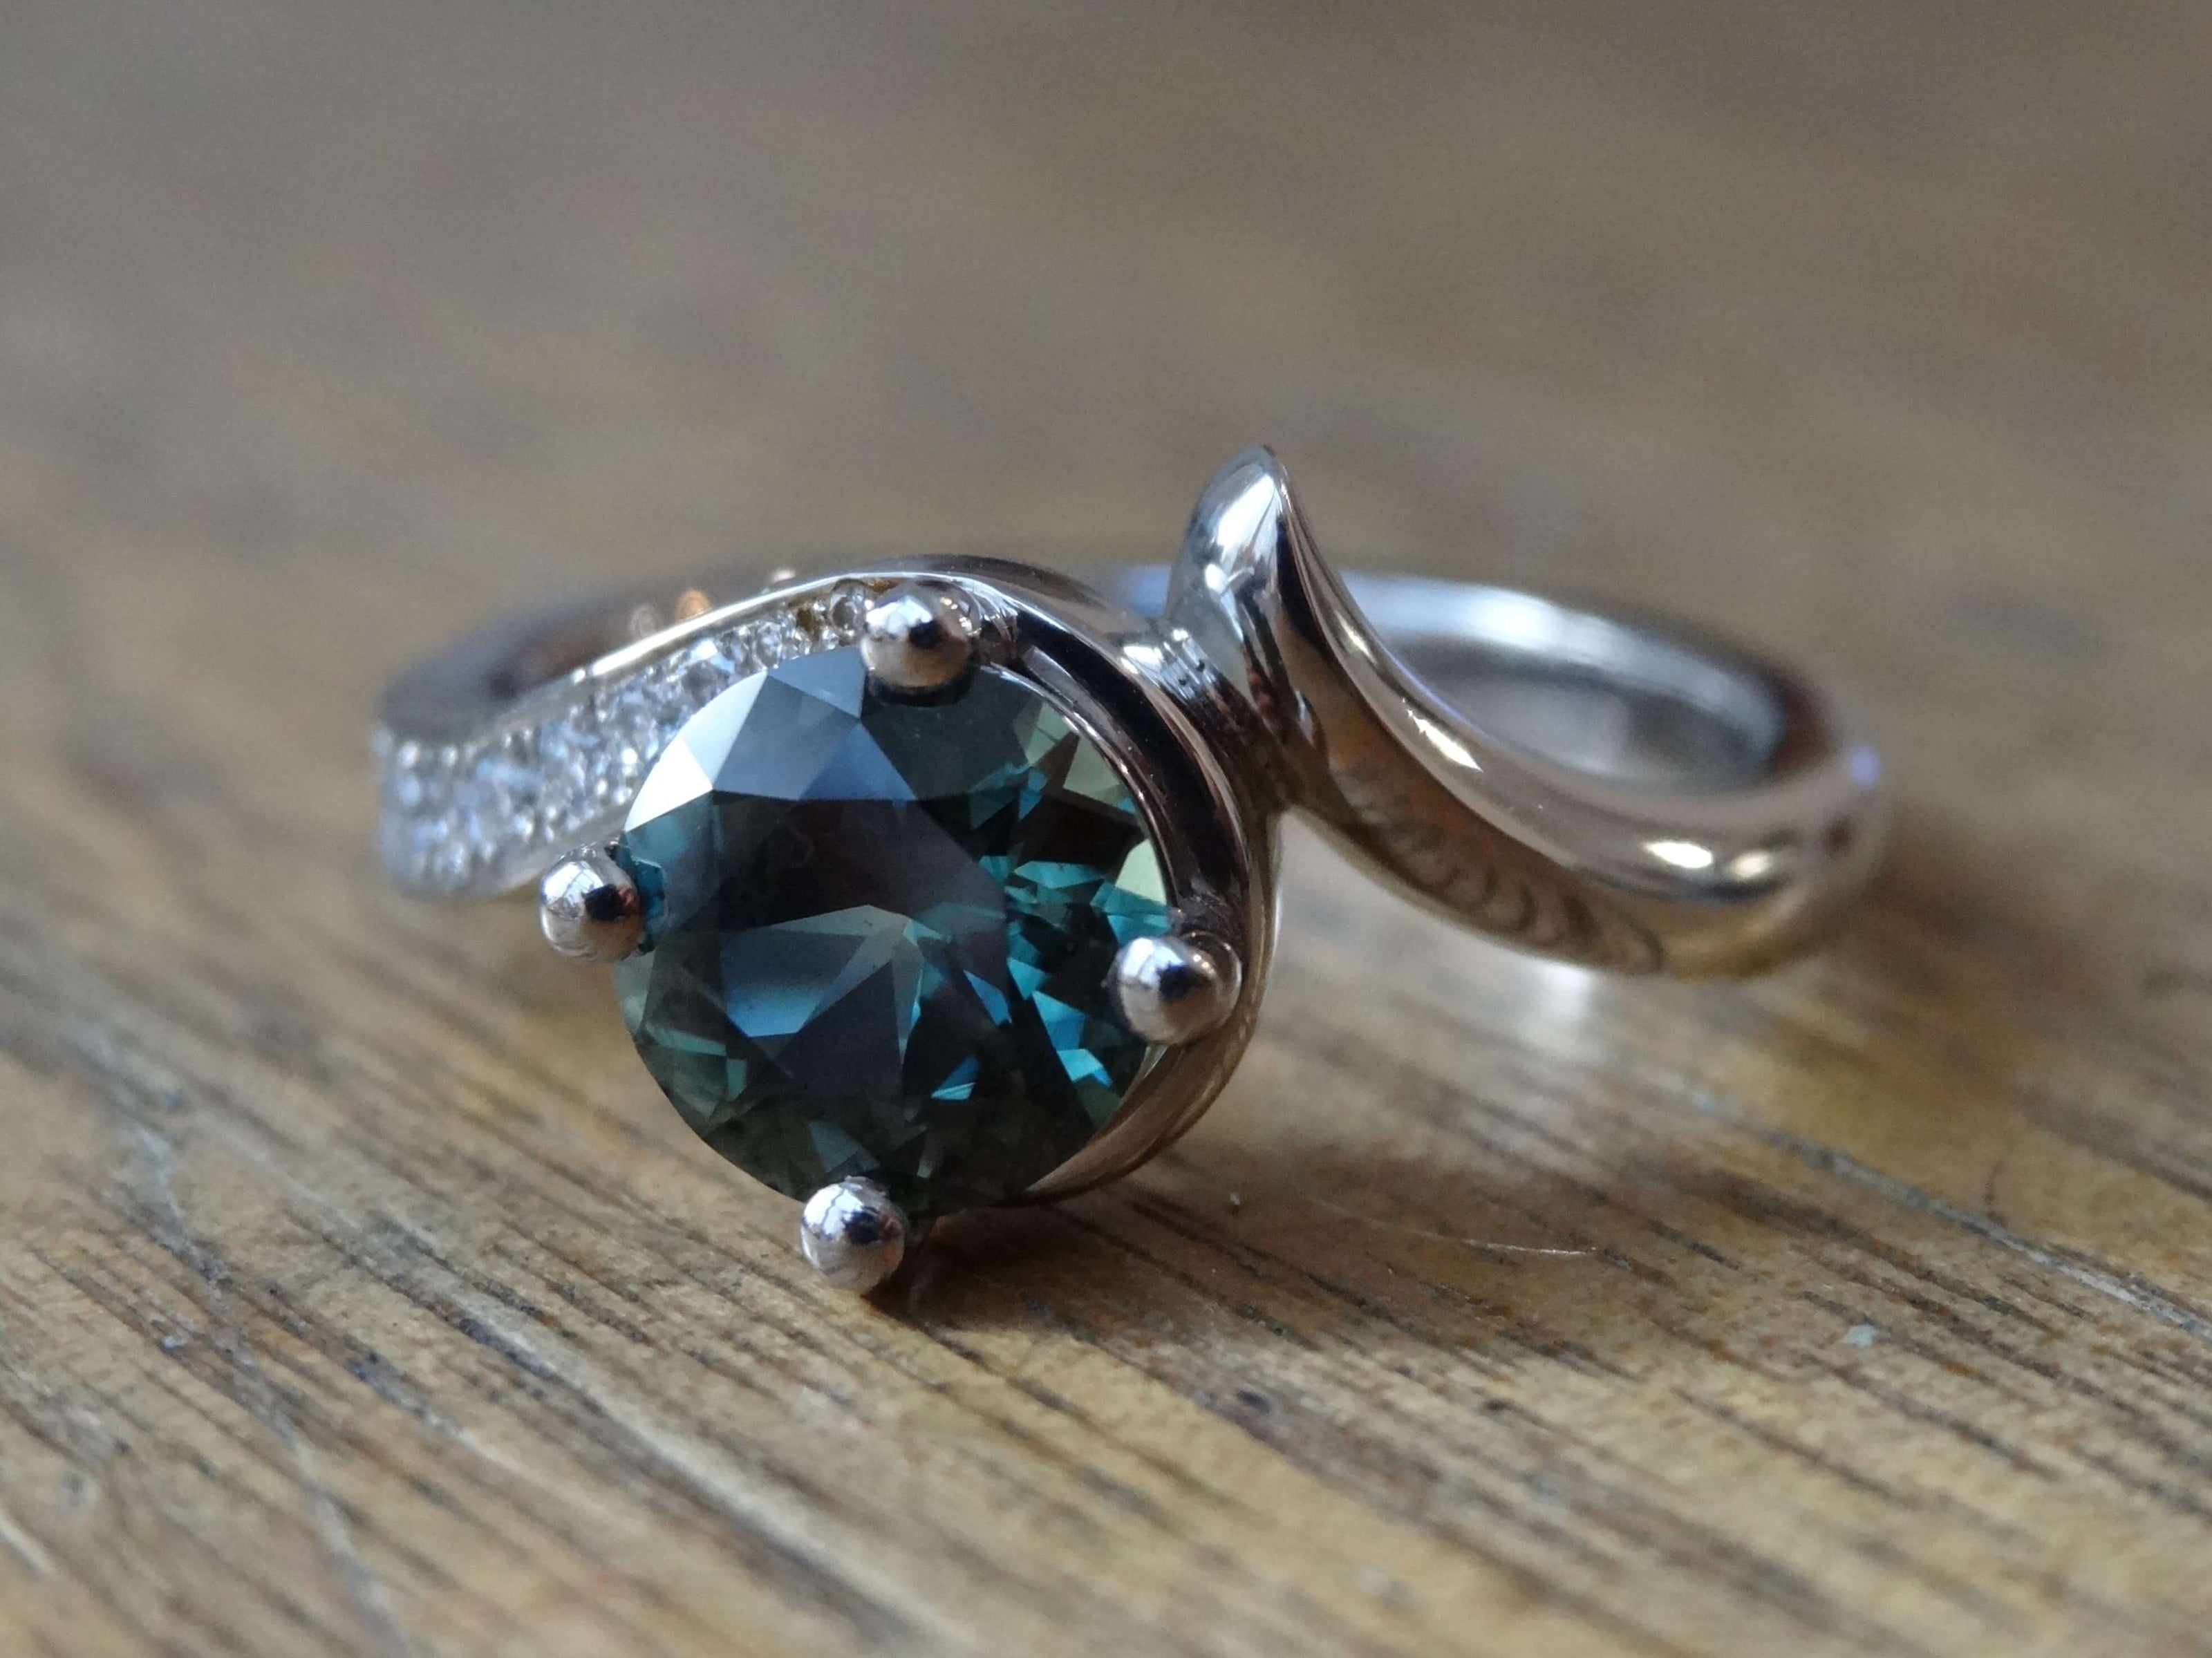 Custom made palladium swirl engagement ring claw set with one round teal sapphire and small diamonds grain set in the band.